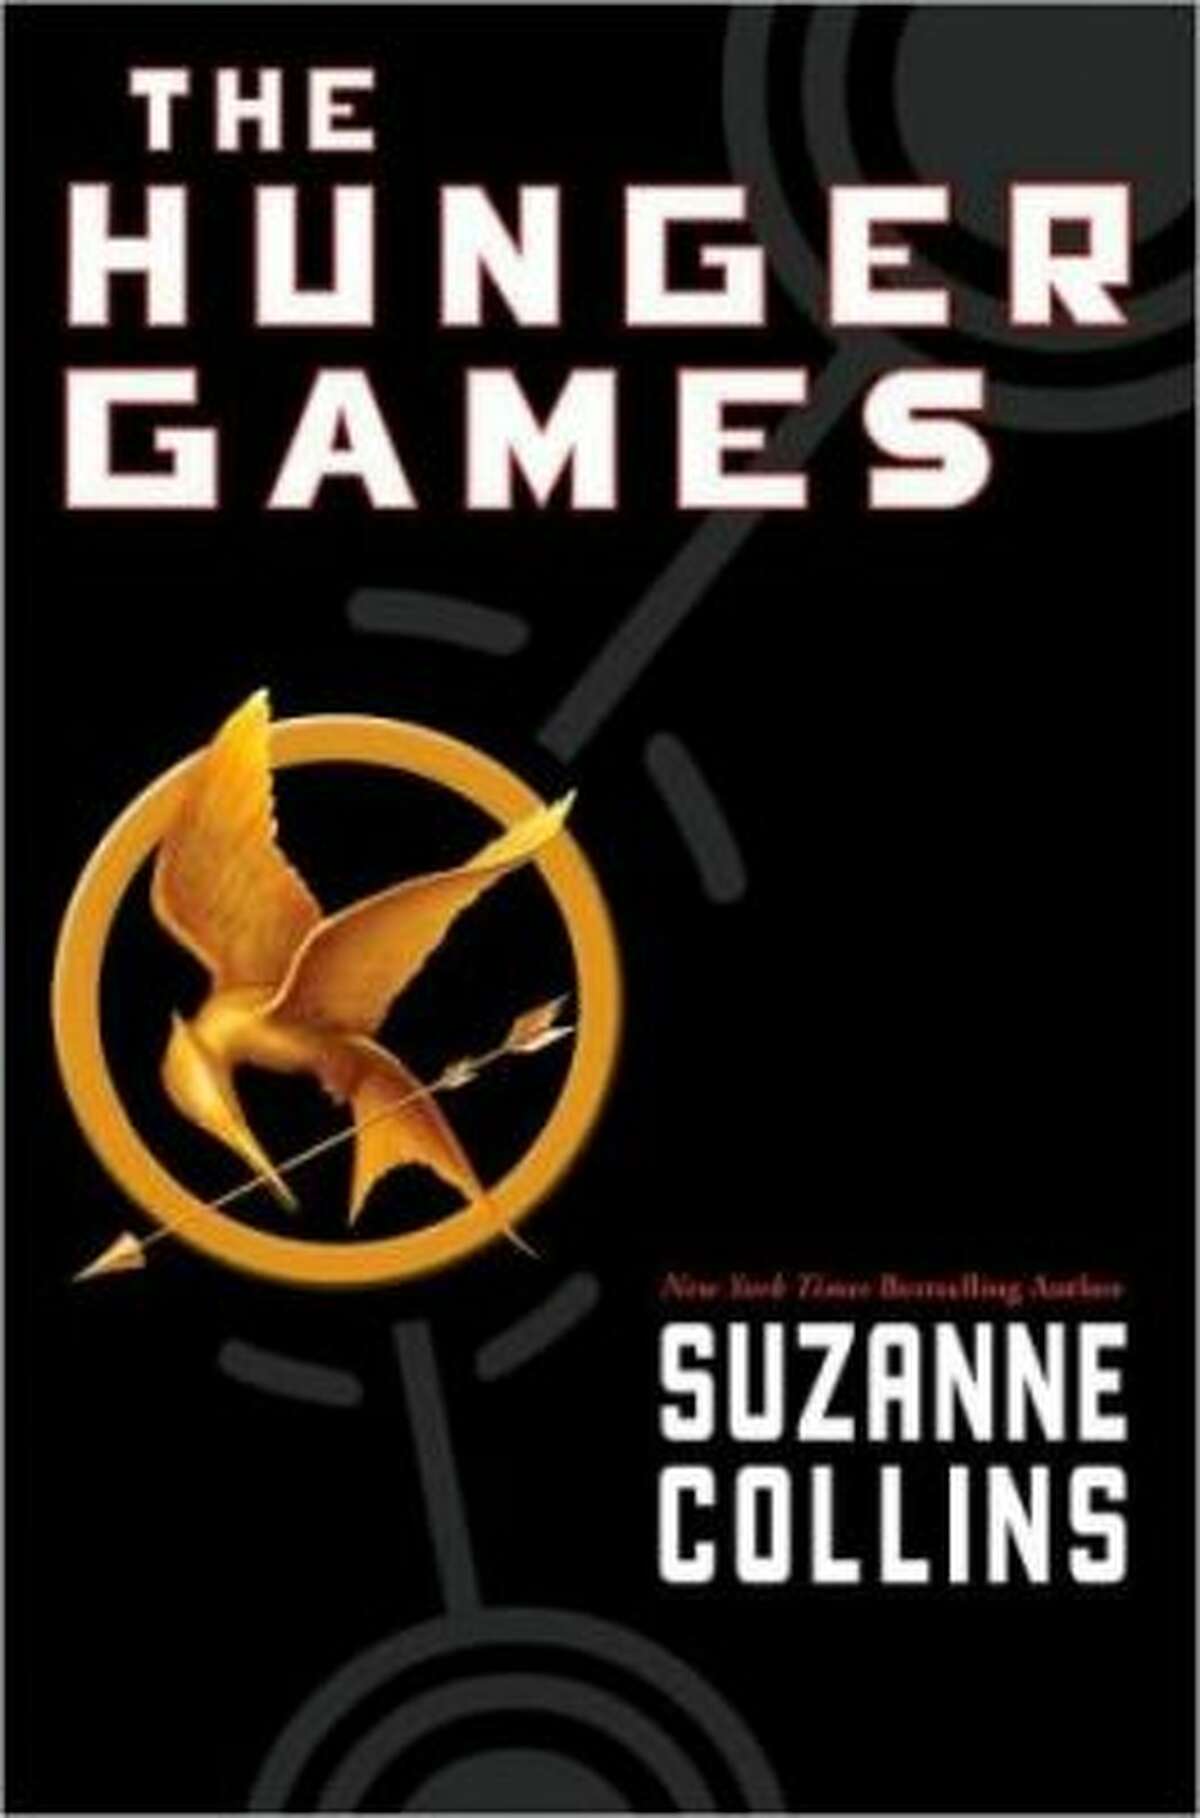 "The Hunger Games" (series), by Suzanne Collins Reasons: sexually explicit, violence, unsuited to age group